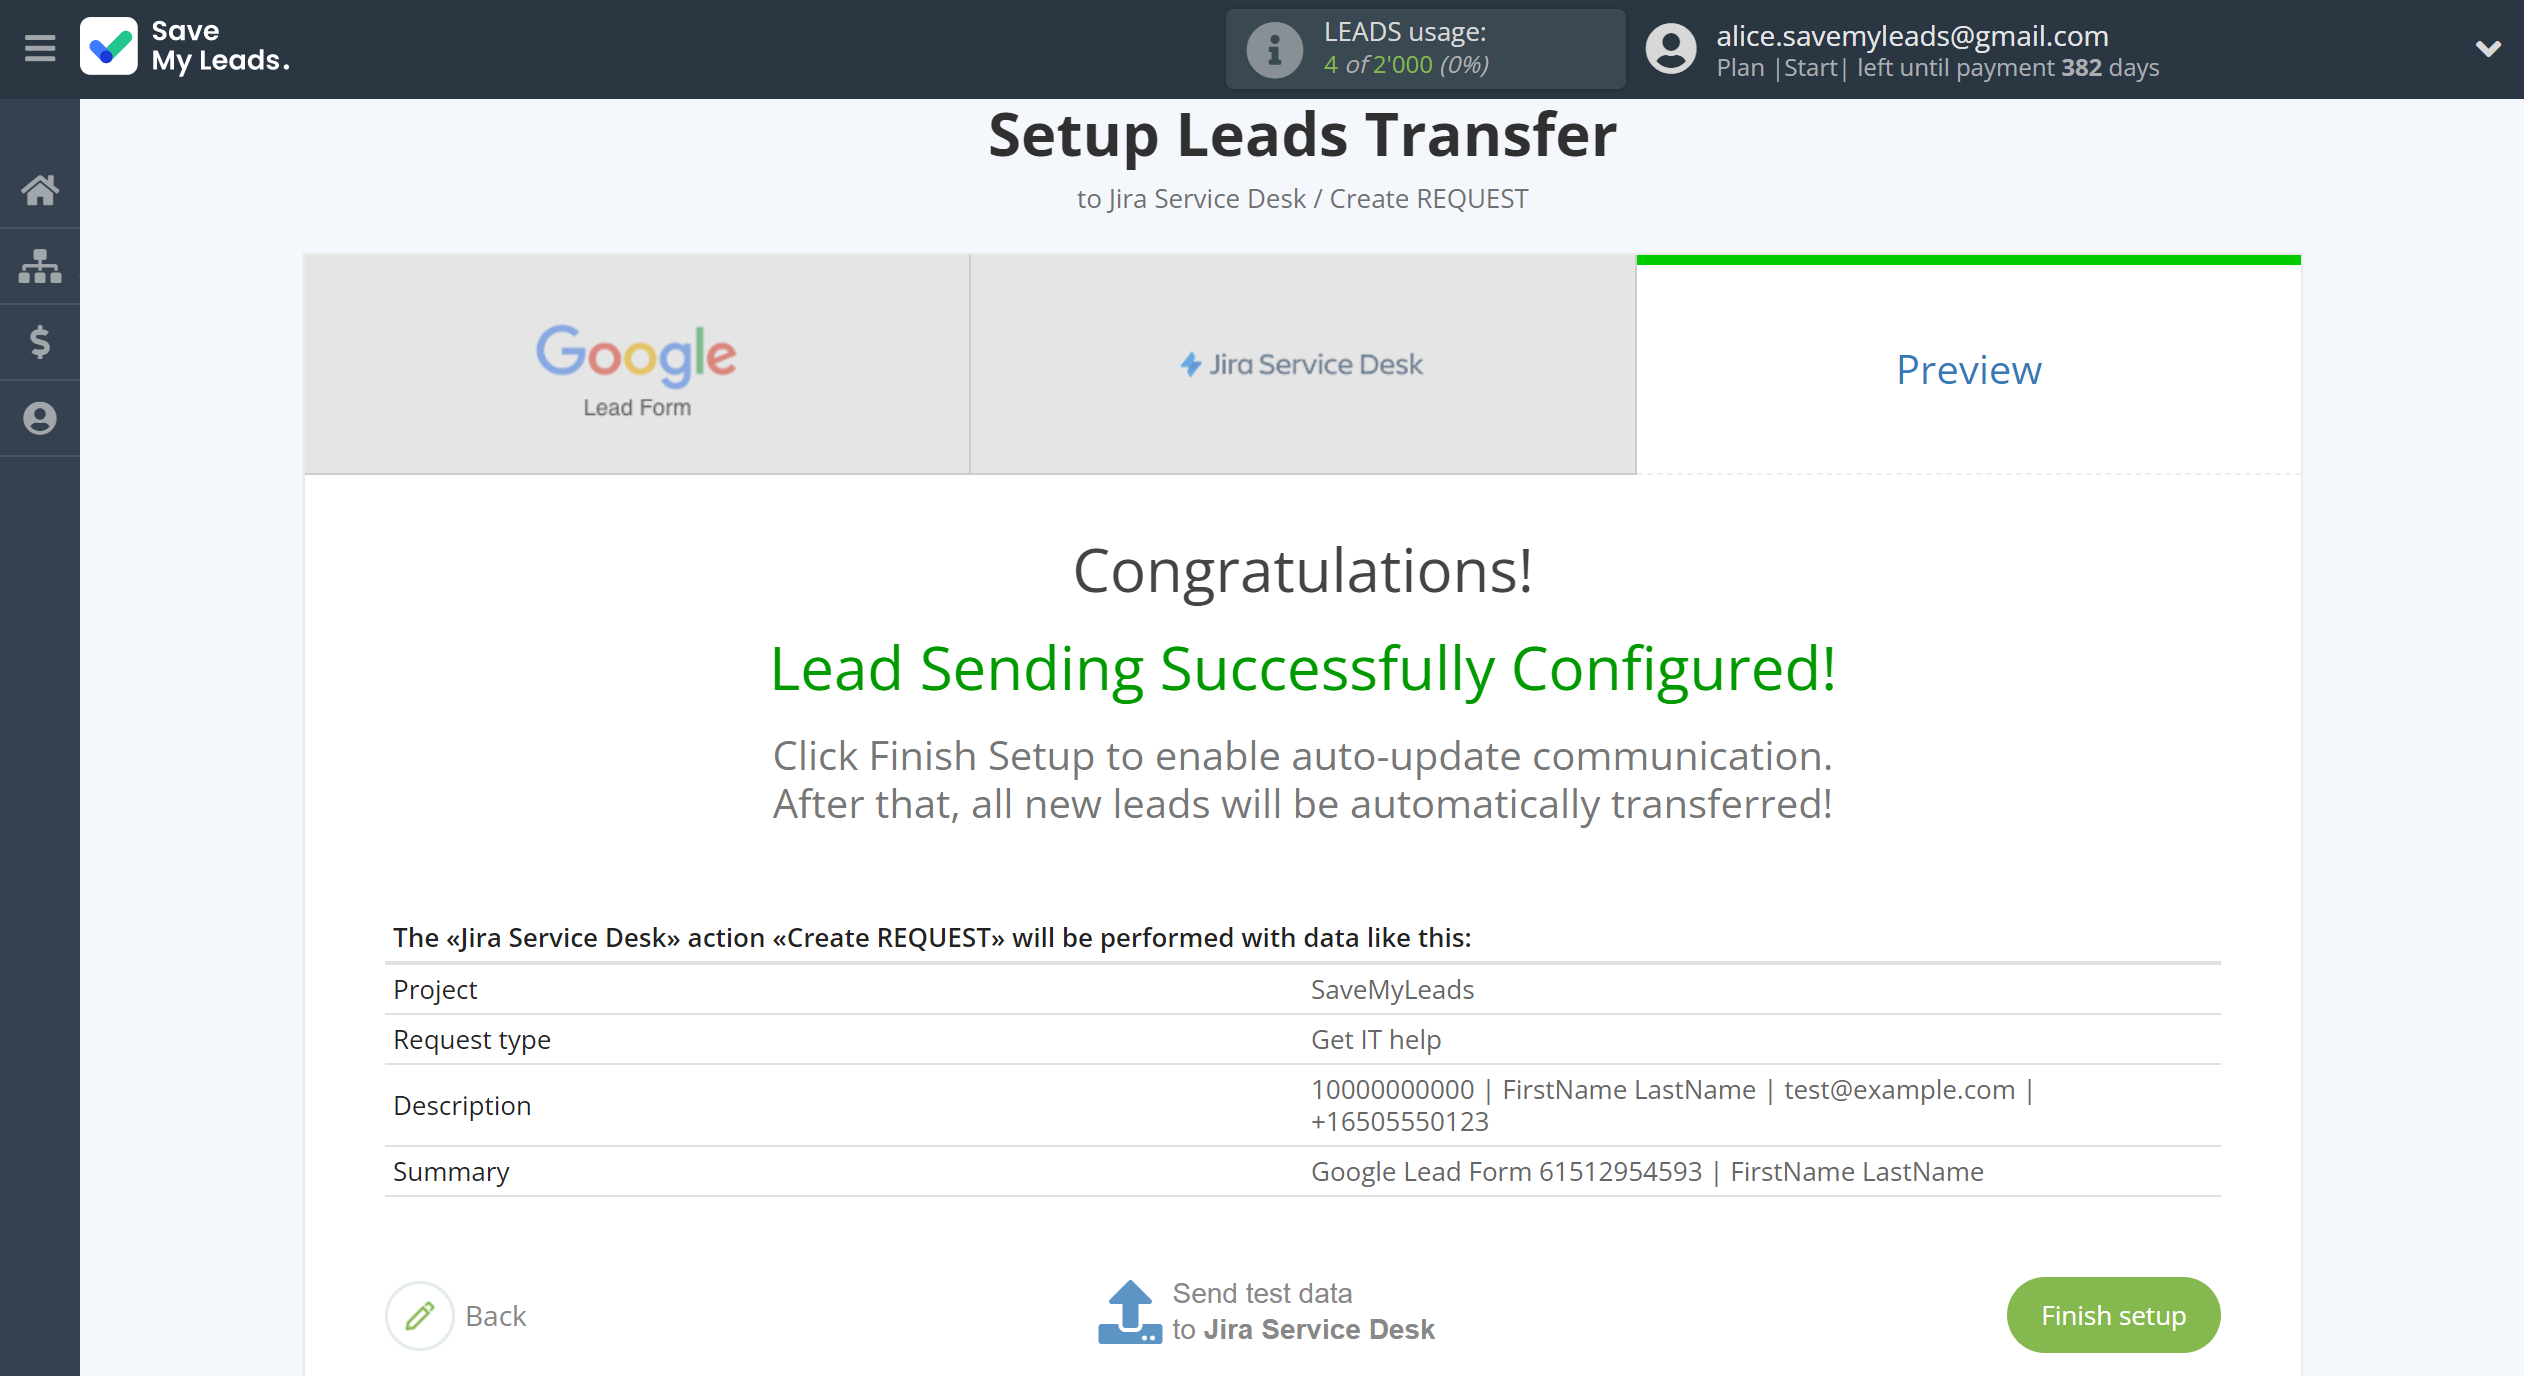 How to Connect Google Lead Form with Jira Service Desk | Test data